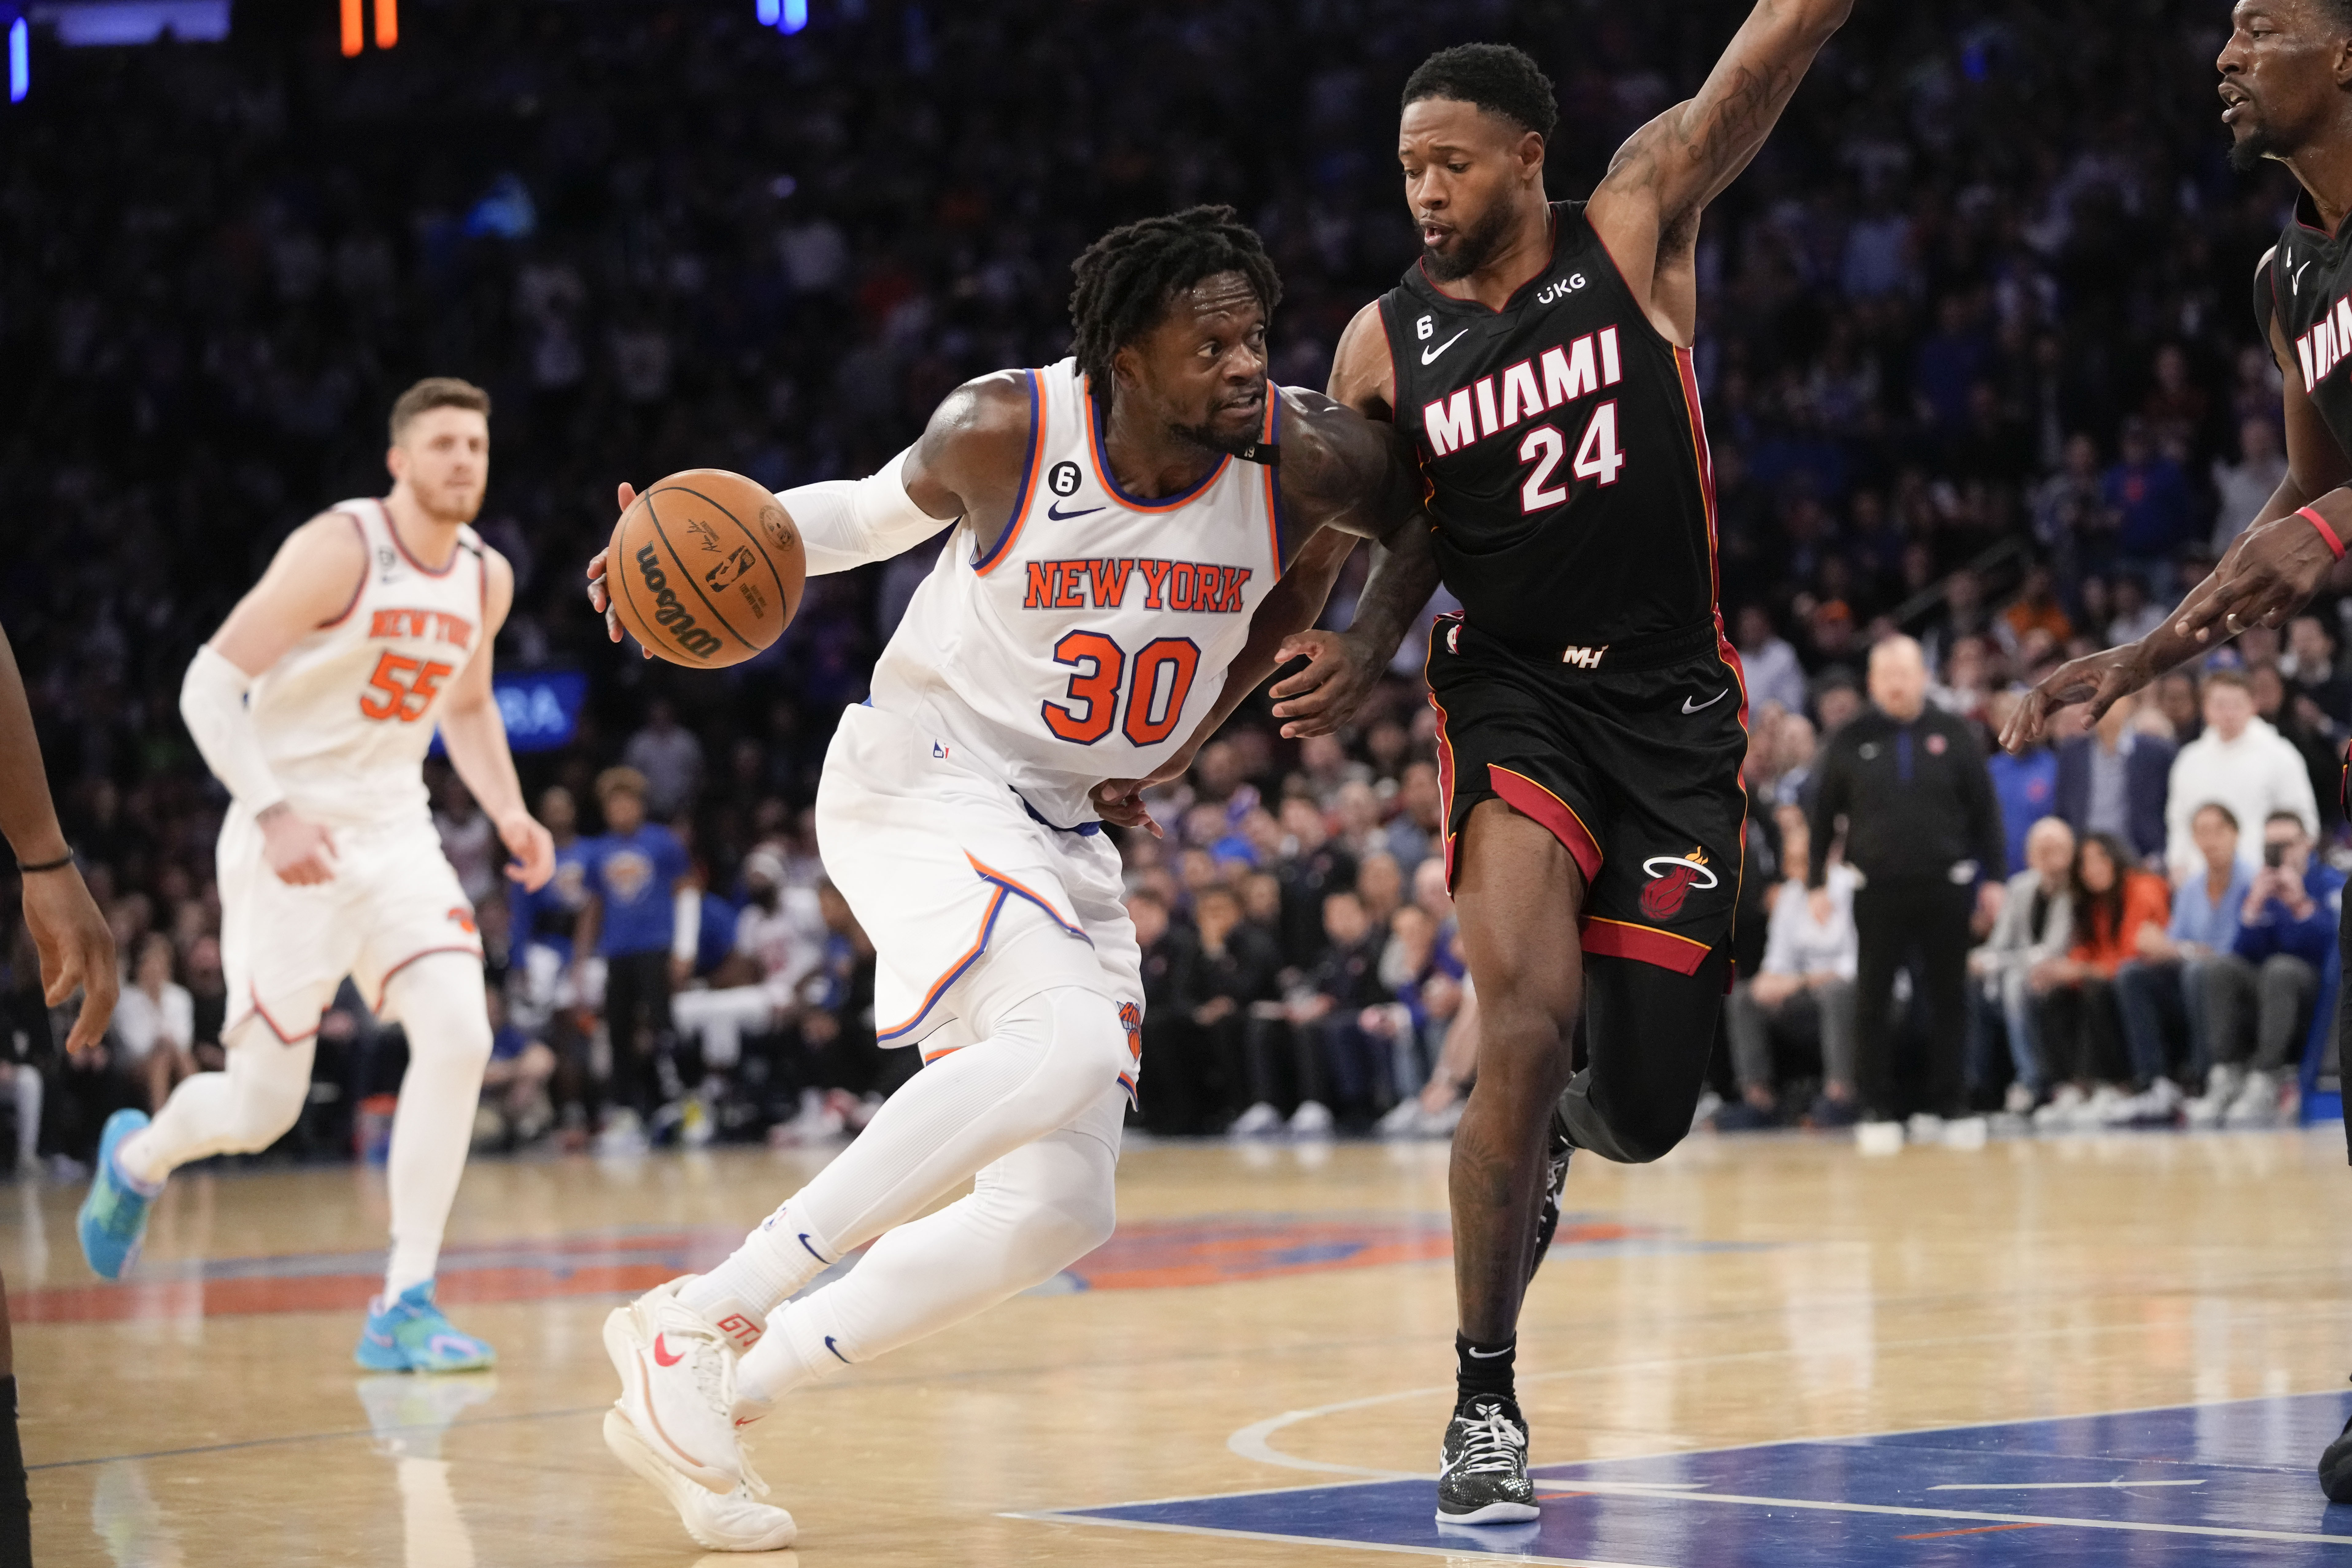 New York Knicks at Miami HEAT Game Preview